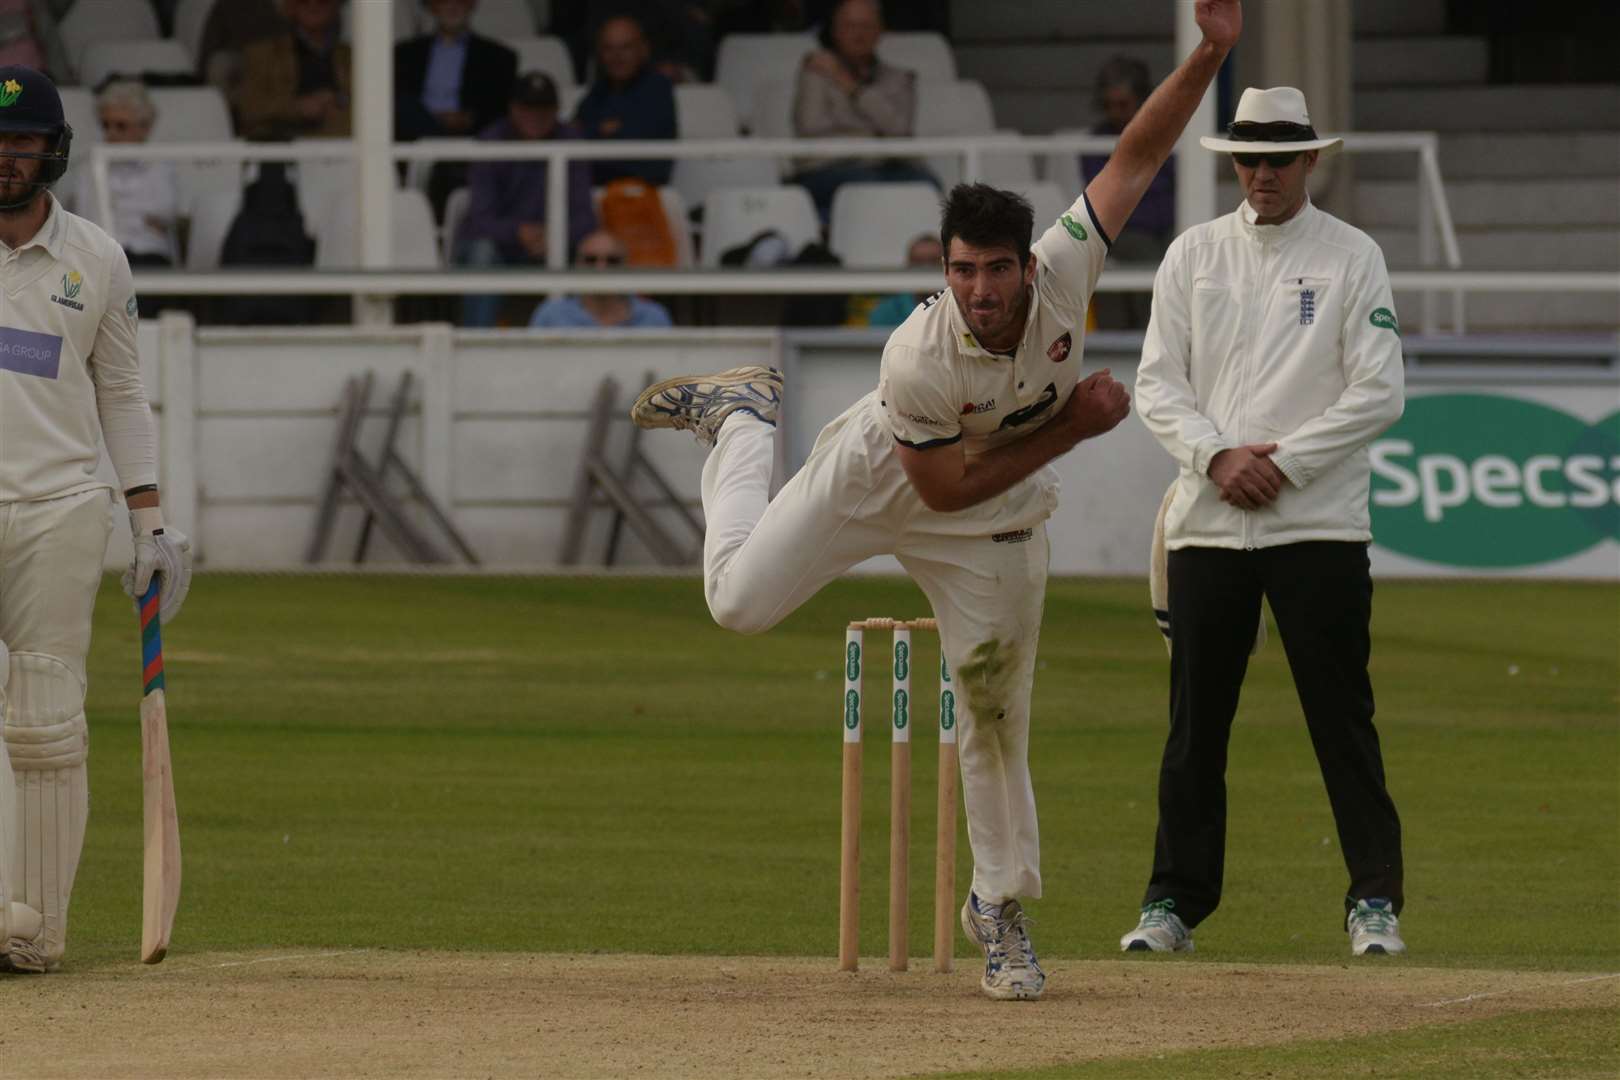 Kent's Grant Stewart bowling during last season's County Championship match against Glamorgan. Picture: Chris Davey